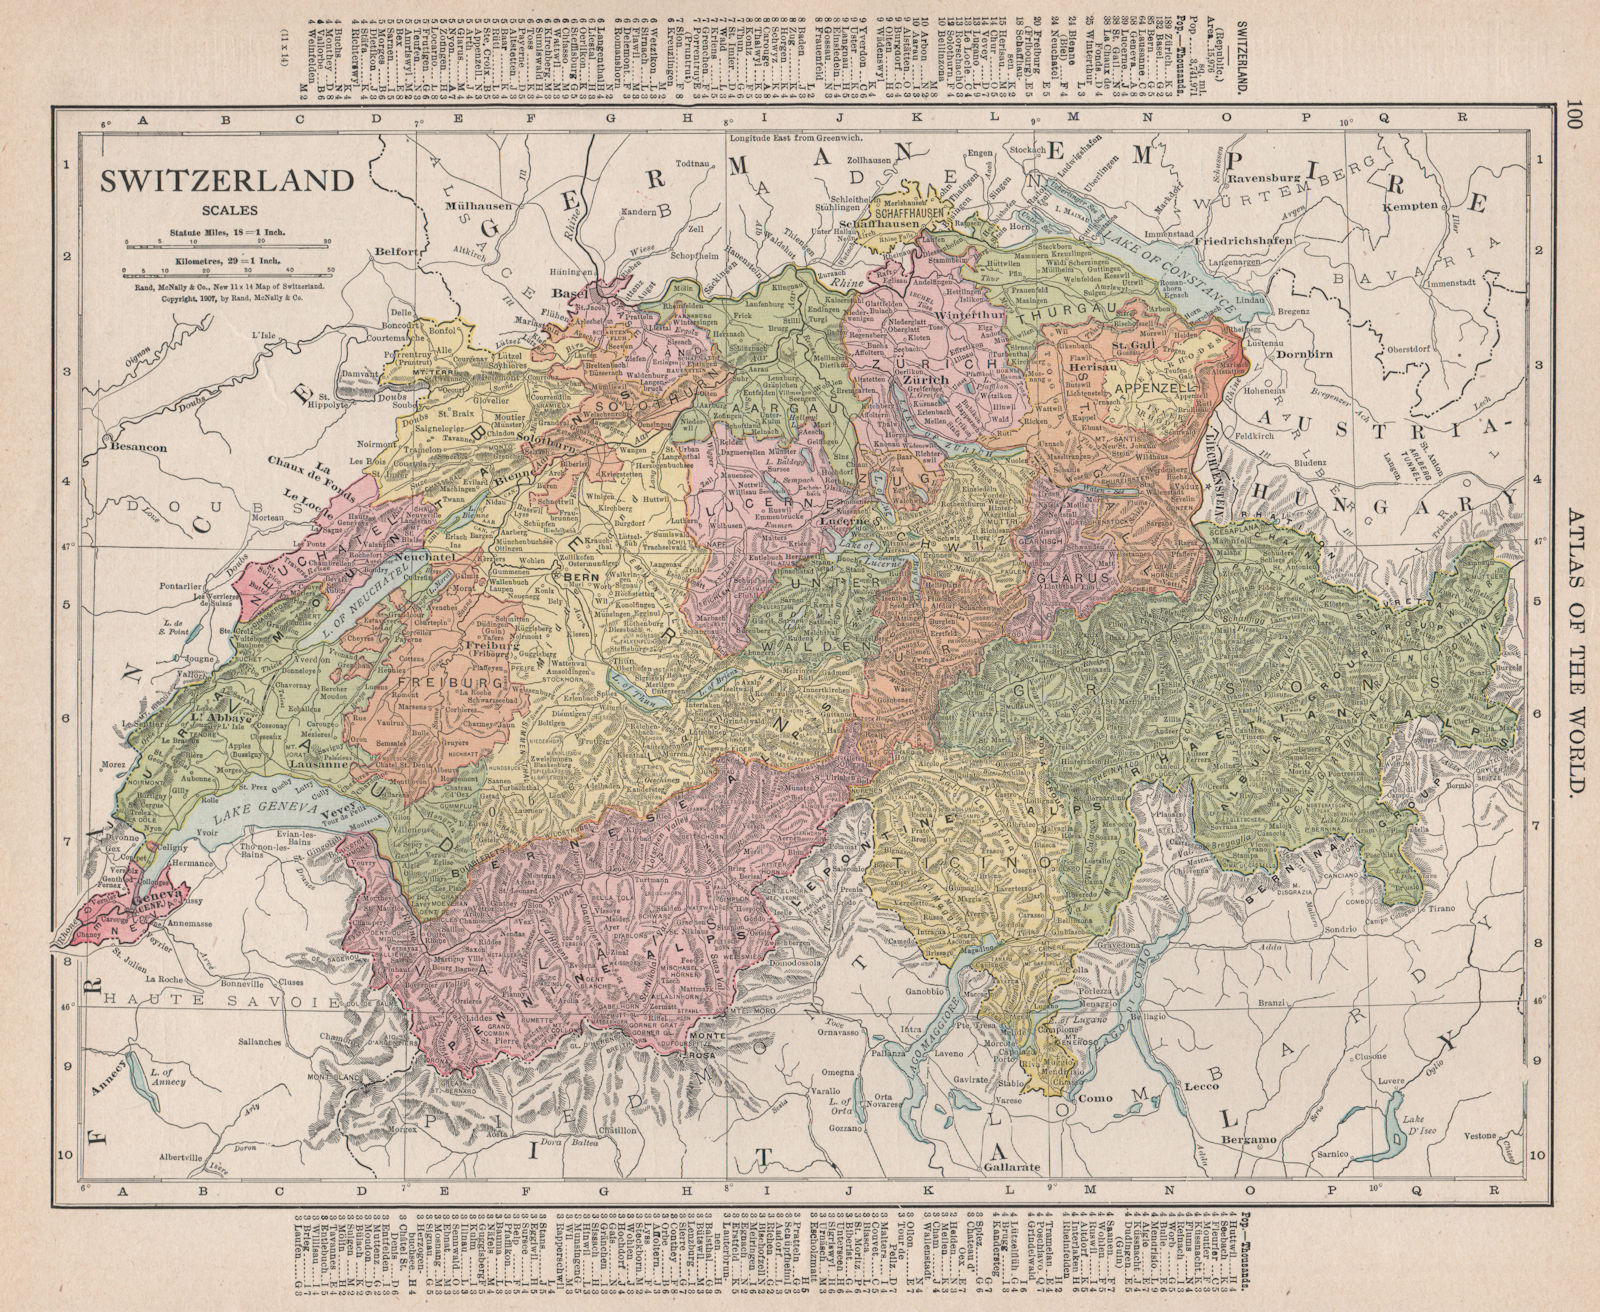 Associate Product Switzerland in cantons. RAND MCNALLY 1912 old antique vintage map plan chart